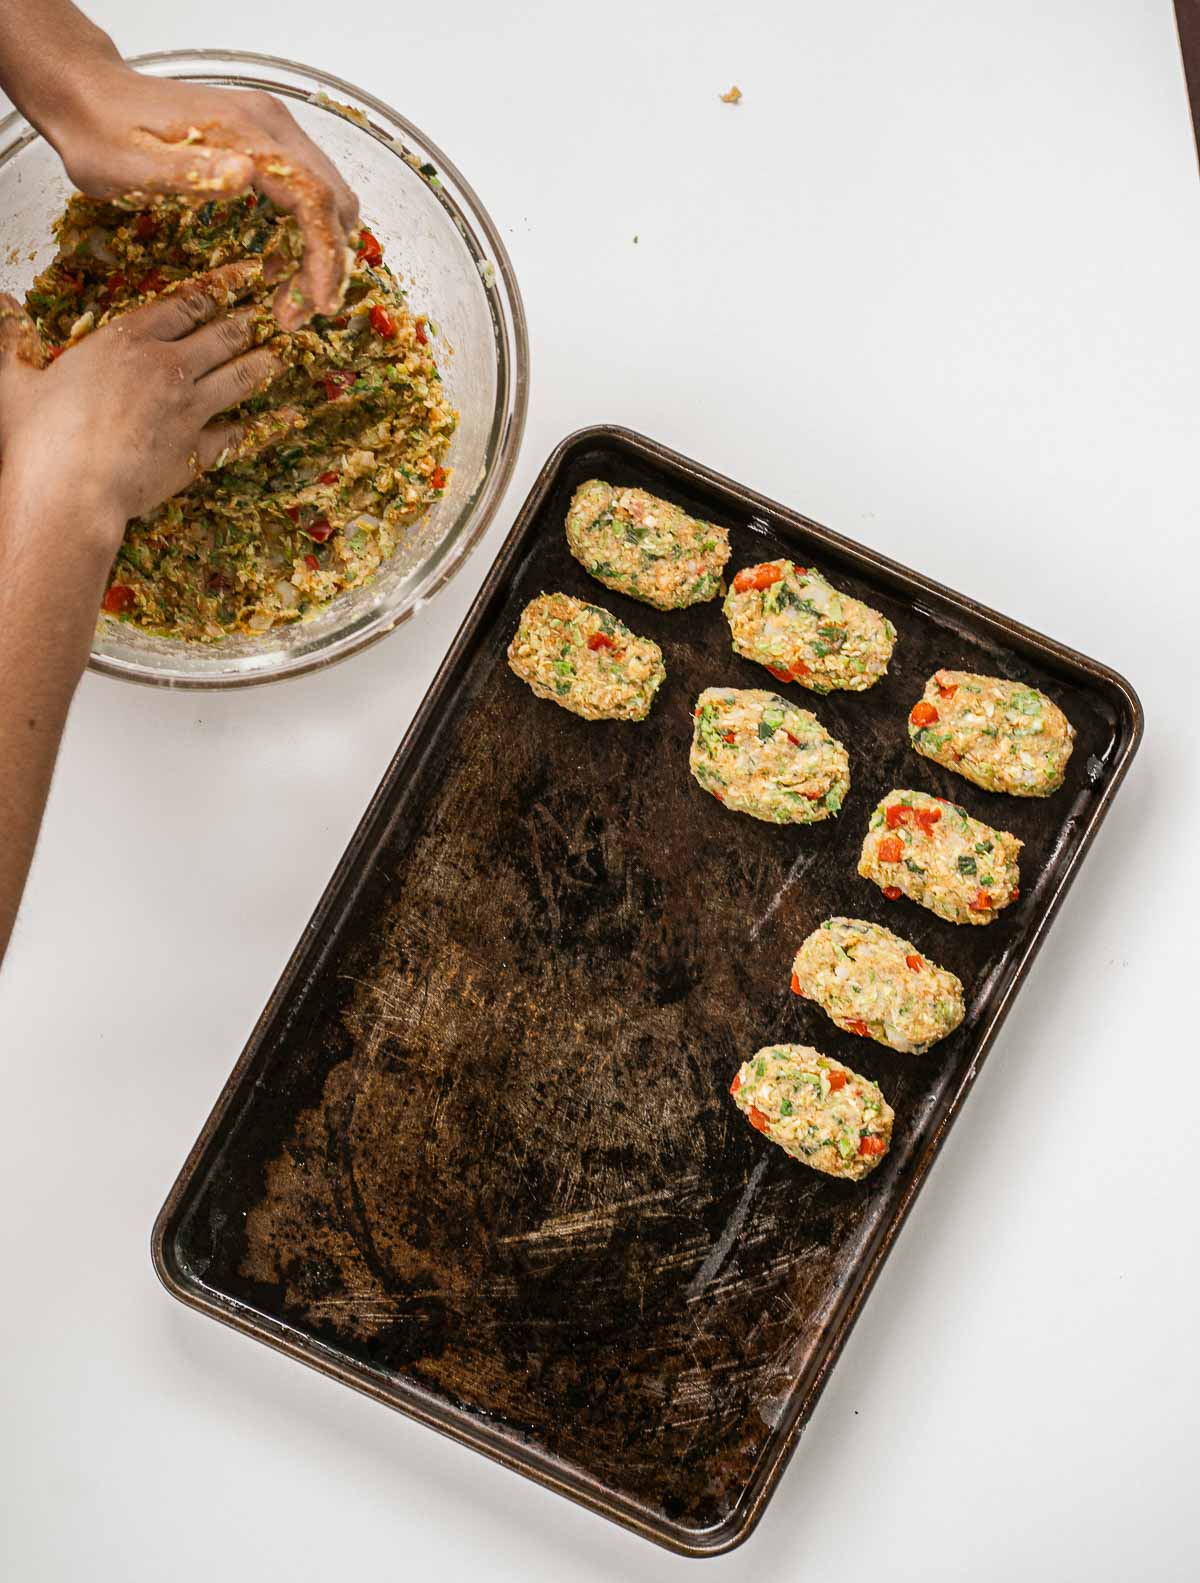 Forming veggie tots and placing them on a baking sheet